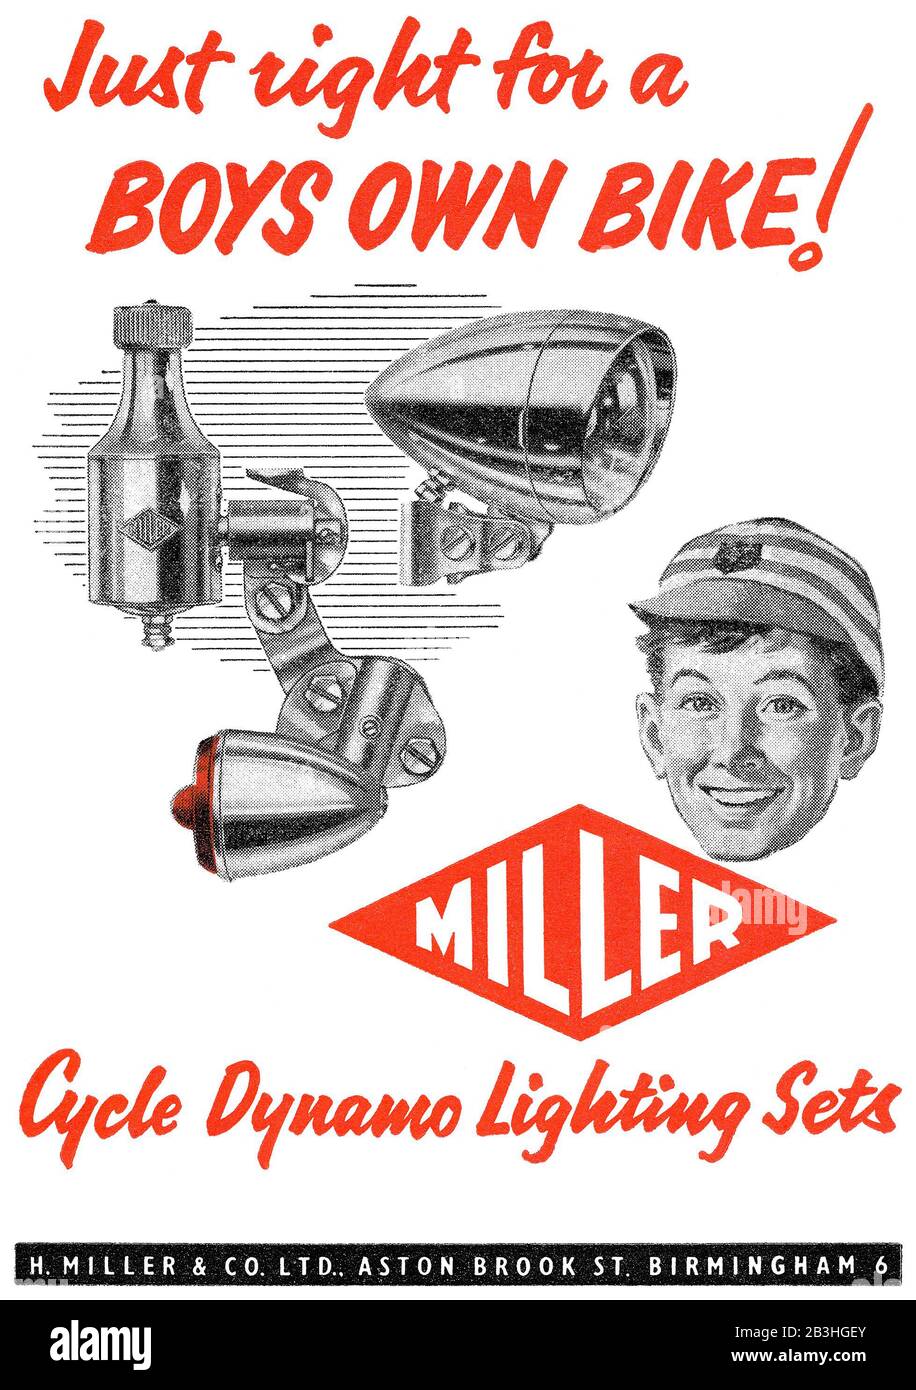 1961 British advertisement for Miller bicycle lights. Stock Photo